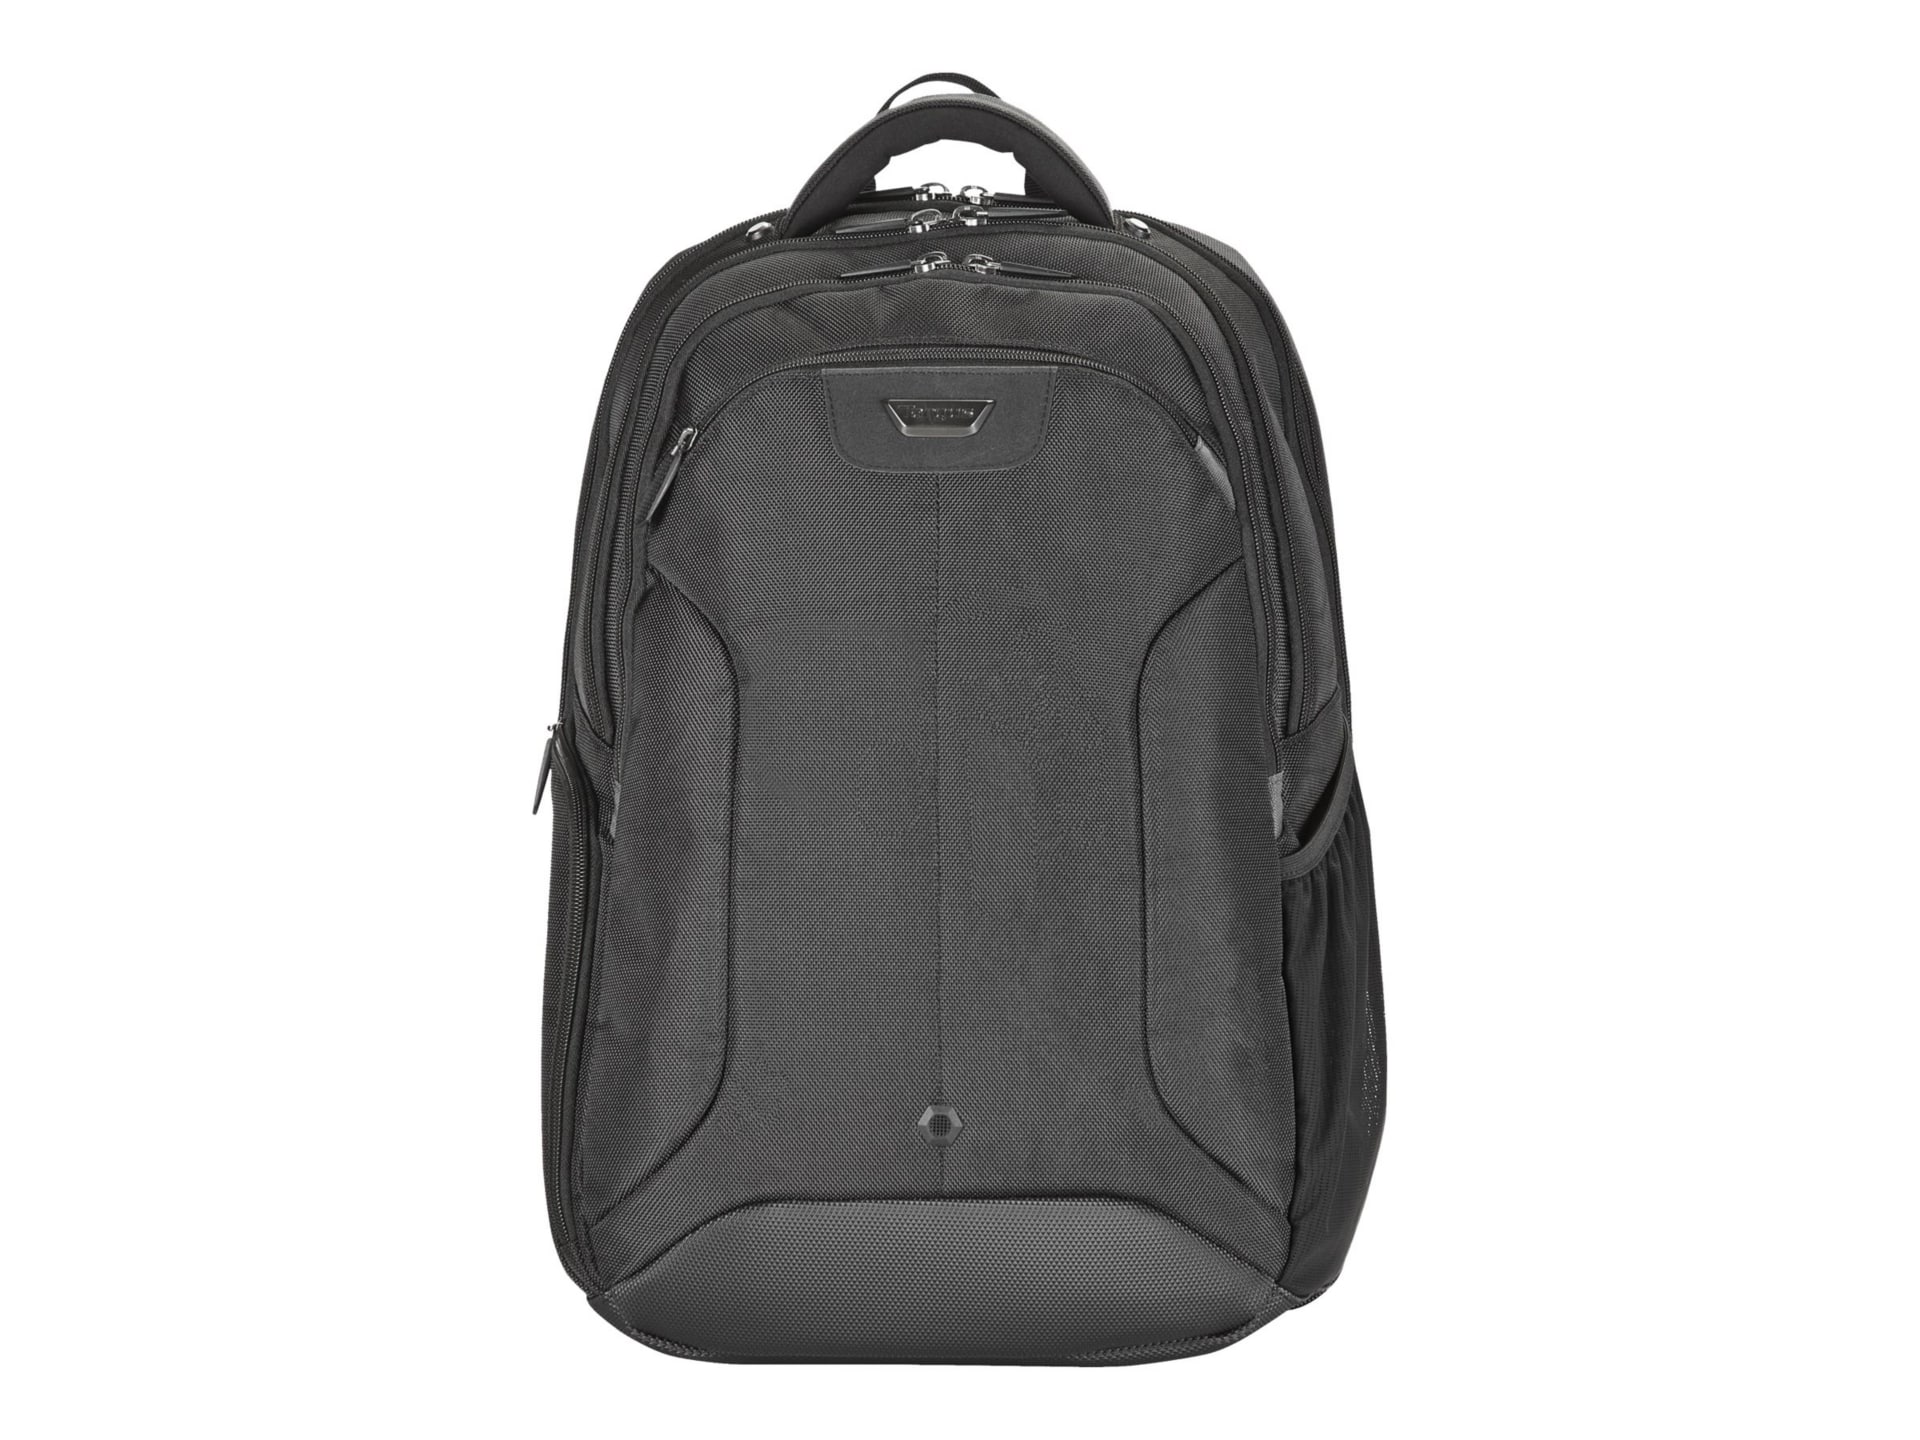 Targus Corporate Traveler CUCT02B Carrying Case (Backpack) for 10.5" to 15.4" Notebook - Black